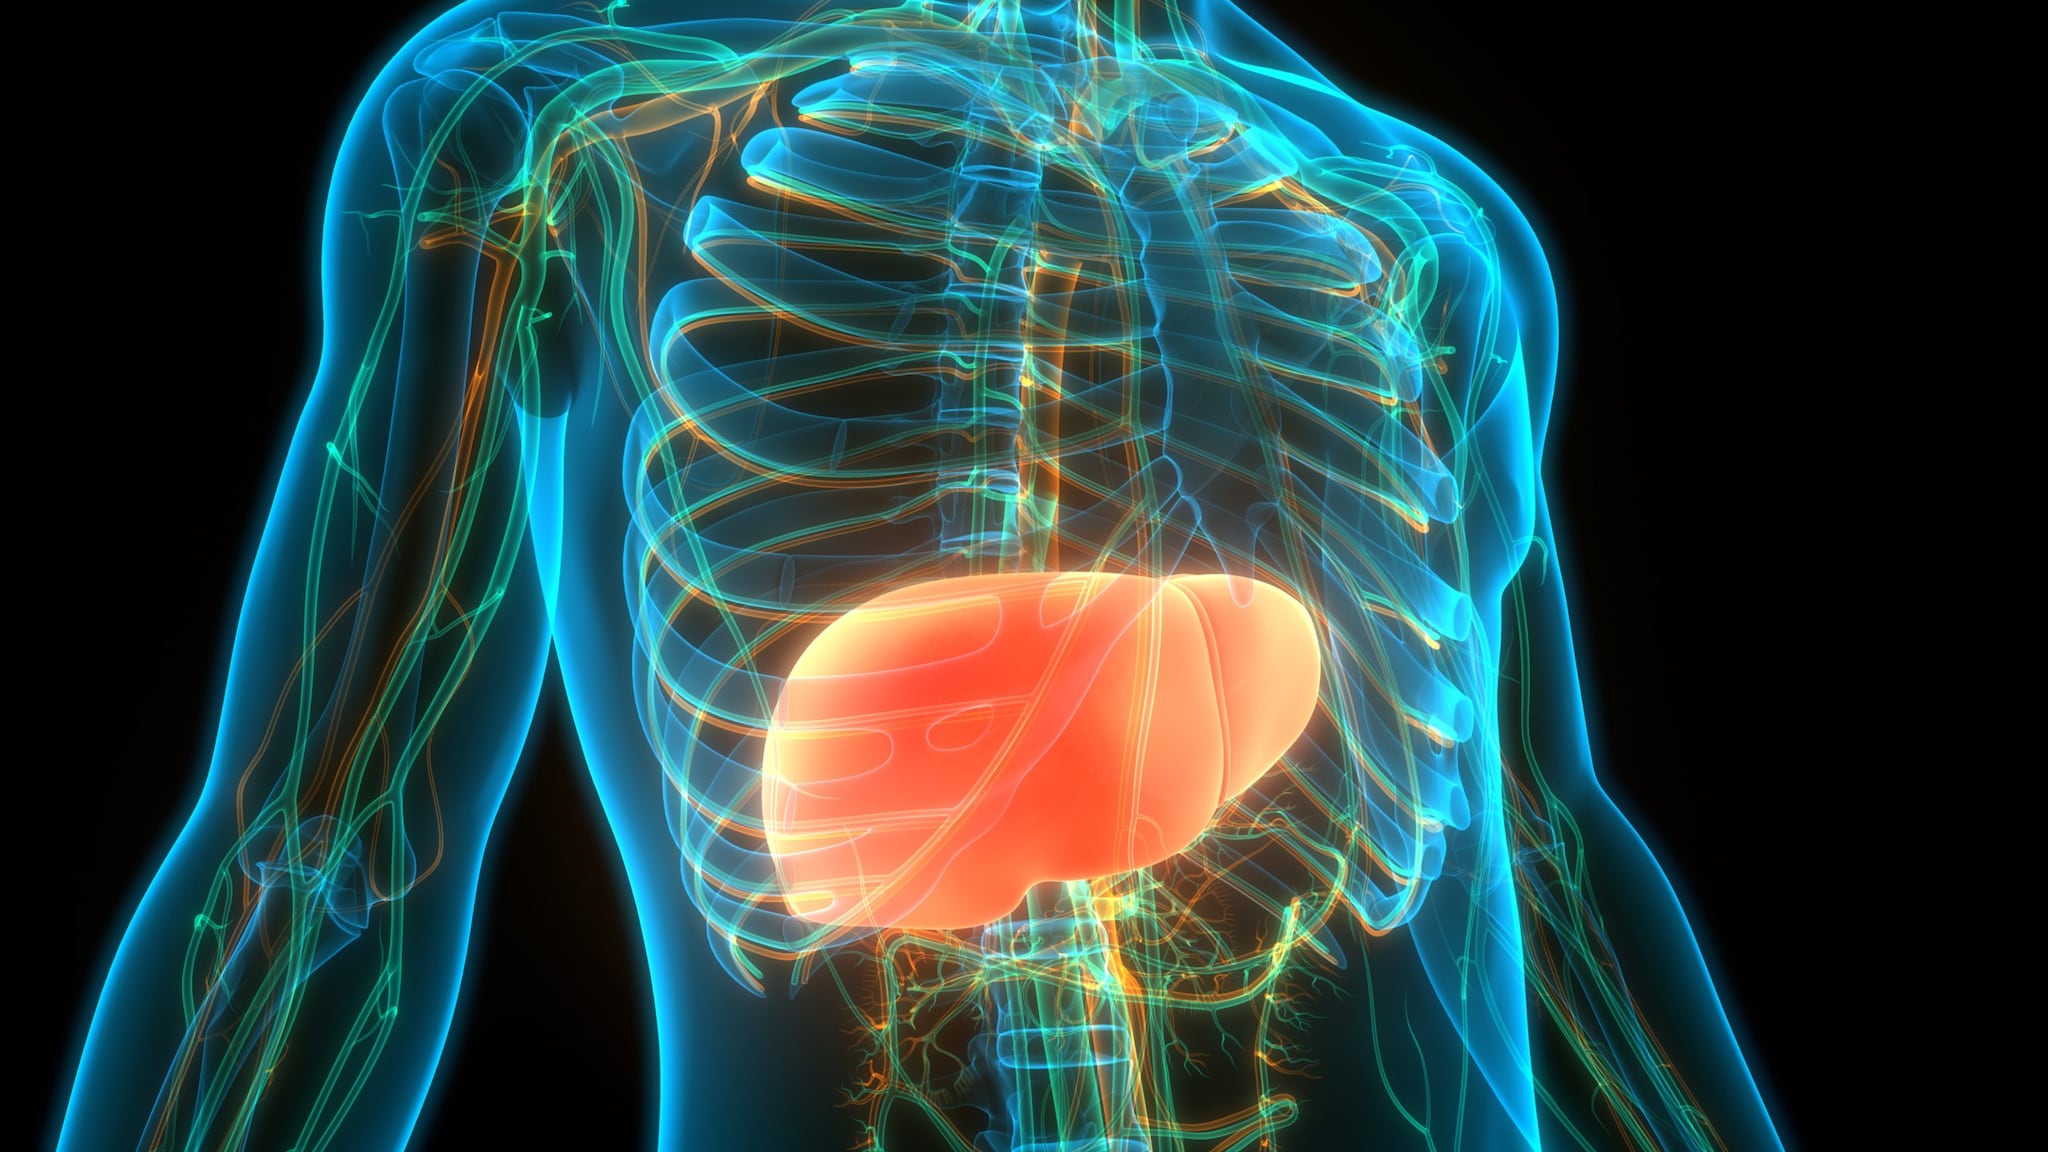 Animated image of the liver inside the body